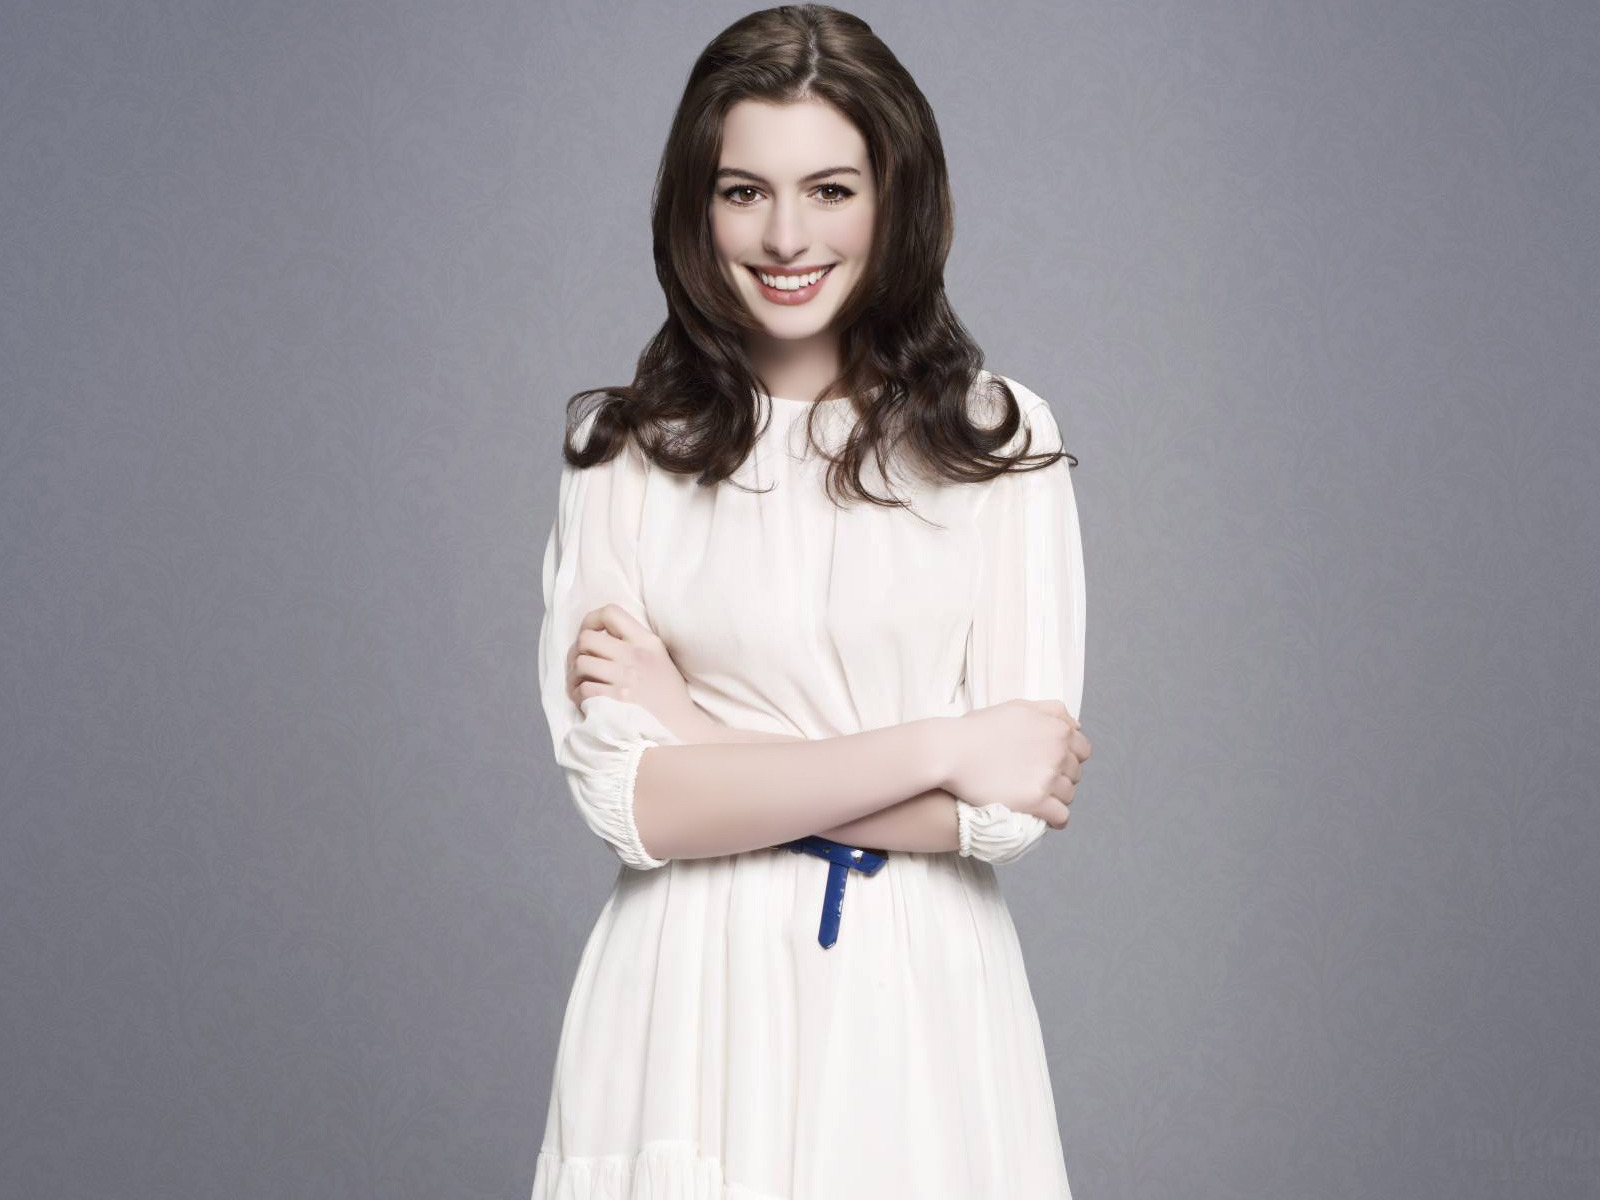 Cute Anne Hathaway for 1600 x 1200 resolution